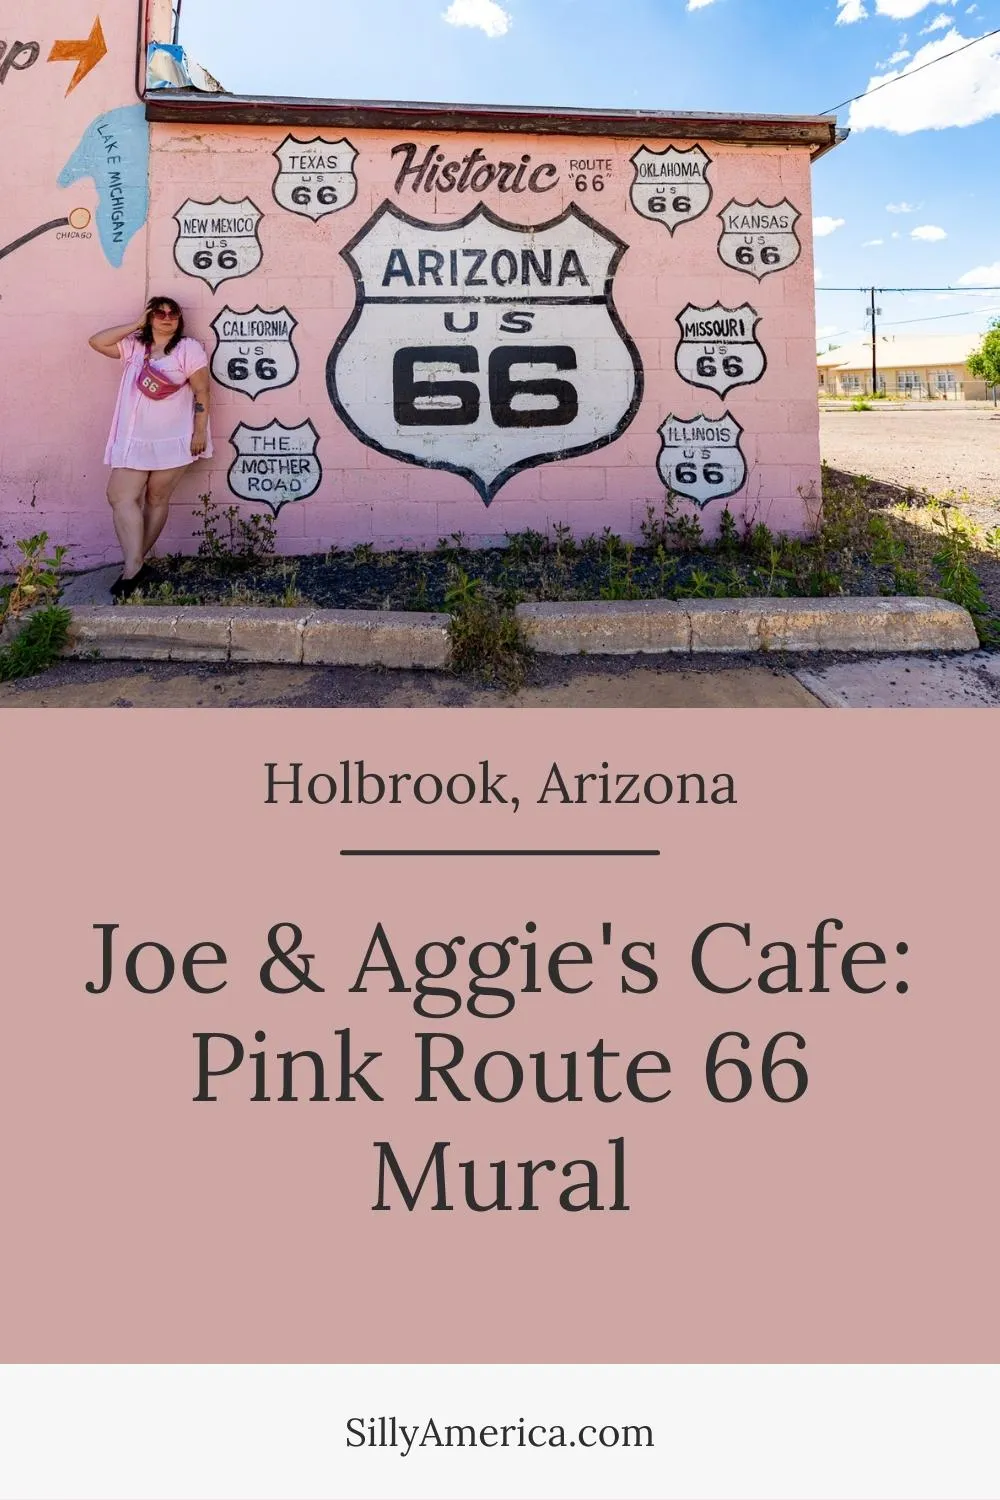 Joe & Aggie's Cafe was once a must-stop for breakfast, lunch, or dinner on Route 66. The restaurant opened in 1943 and served American and Mexican staples in an iconic pink building. It is even said to be one of the inspirations for the Pixar movie Cars. The restaurant closed but the legacy lives on with an intact facade including the cute pink Route 66 mural on the east side of the building. Stop for fun Instagram pictures with this Arizona Route 66 roadside attraction. #Route66 #ArizonaRoute66